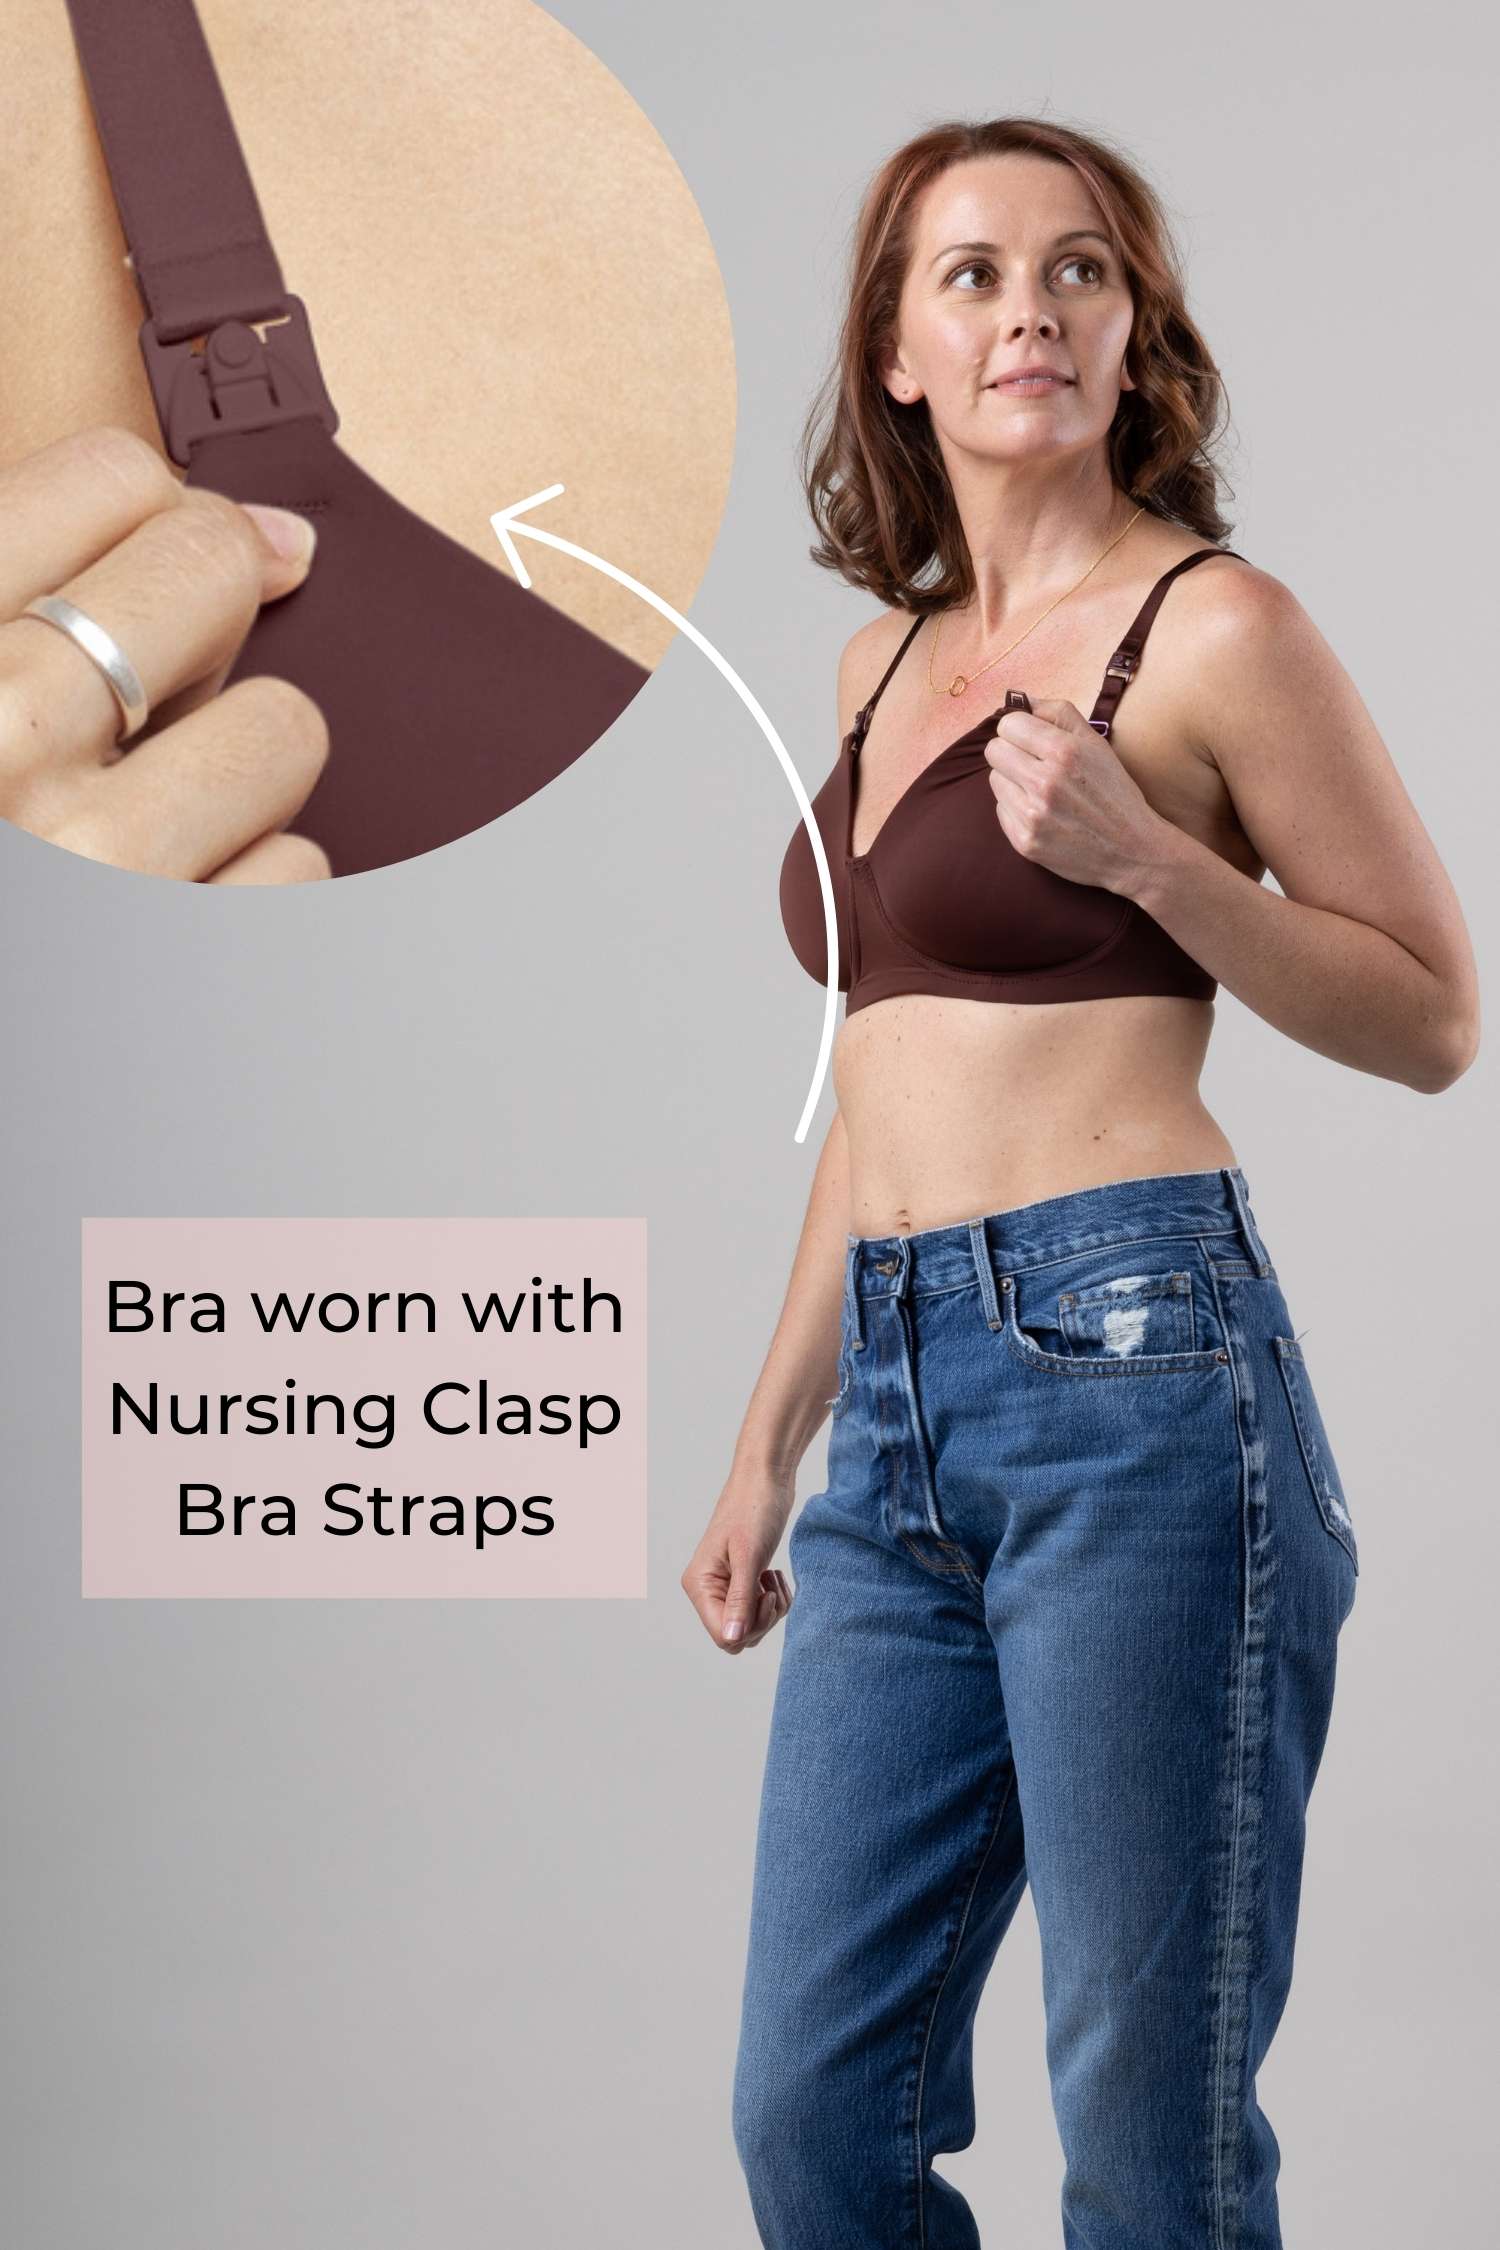 Why I Almost Never Wear a Bra. Why I almost never wear a bra? My…, by  Cafletch